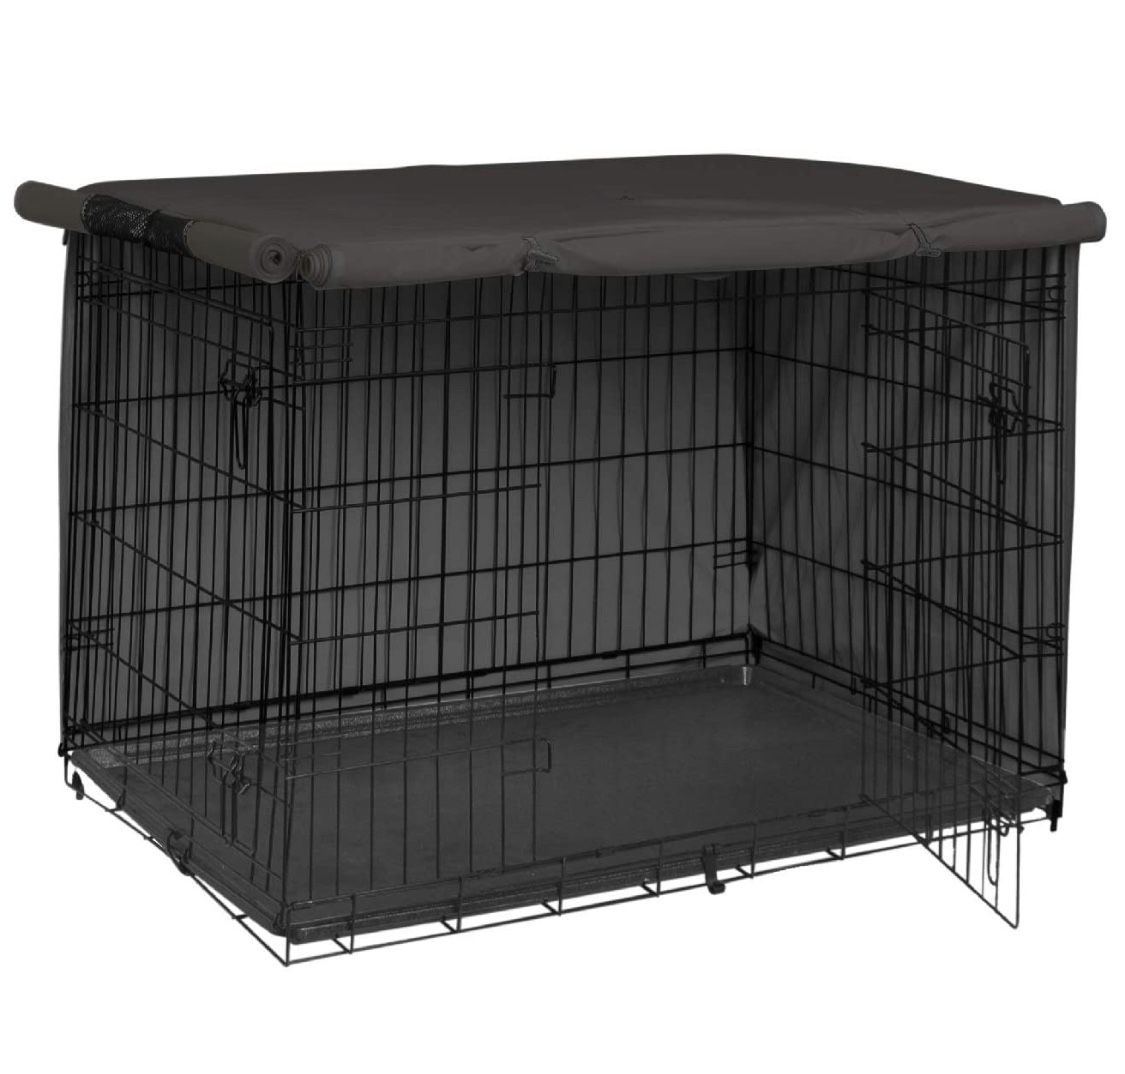 Dog crate 36” w/ cover